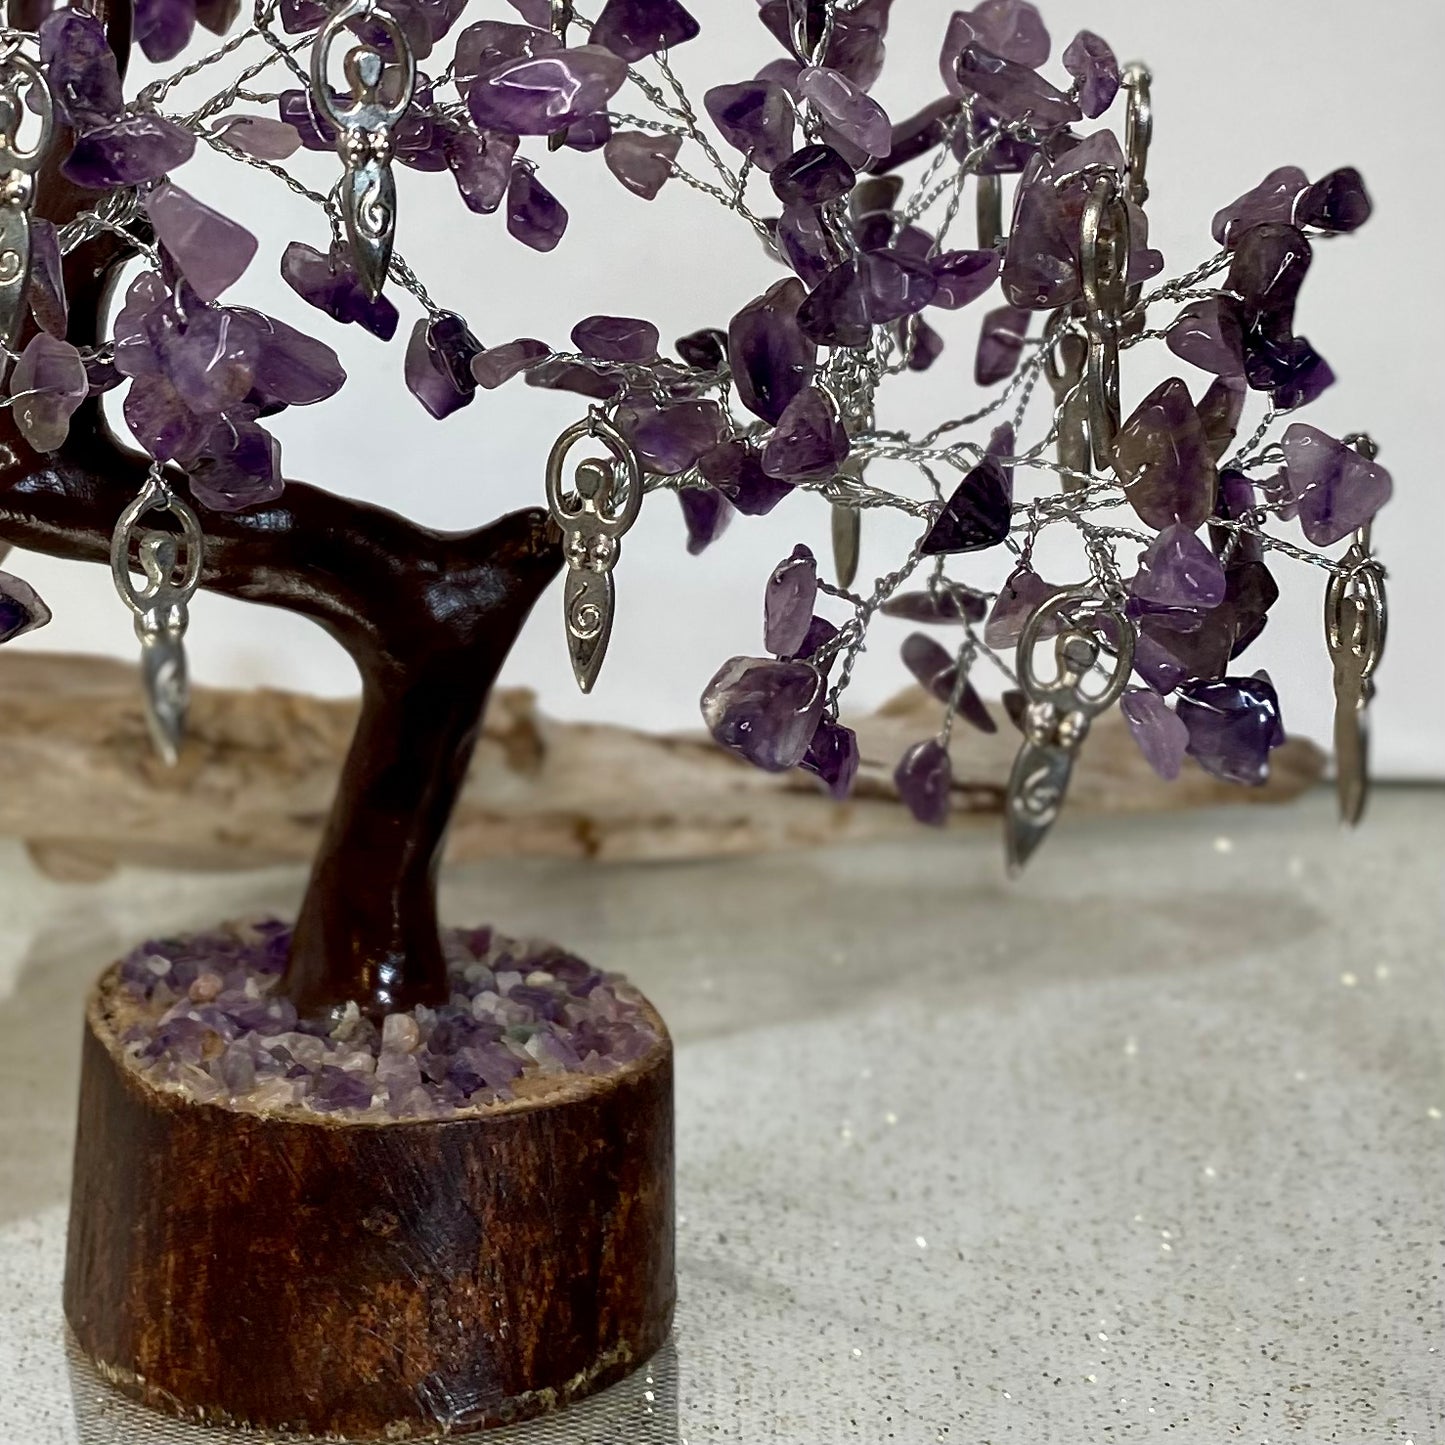 Amethyst Goddess Bonsai tree for Peace & Serenity with 300 Crystals